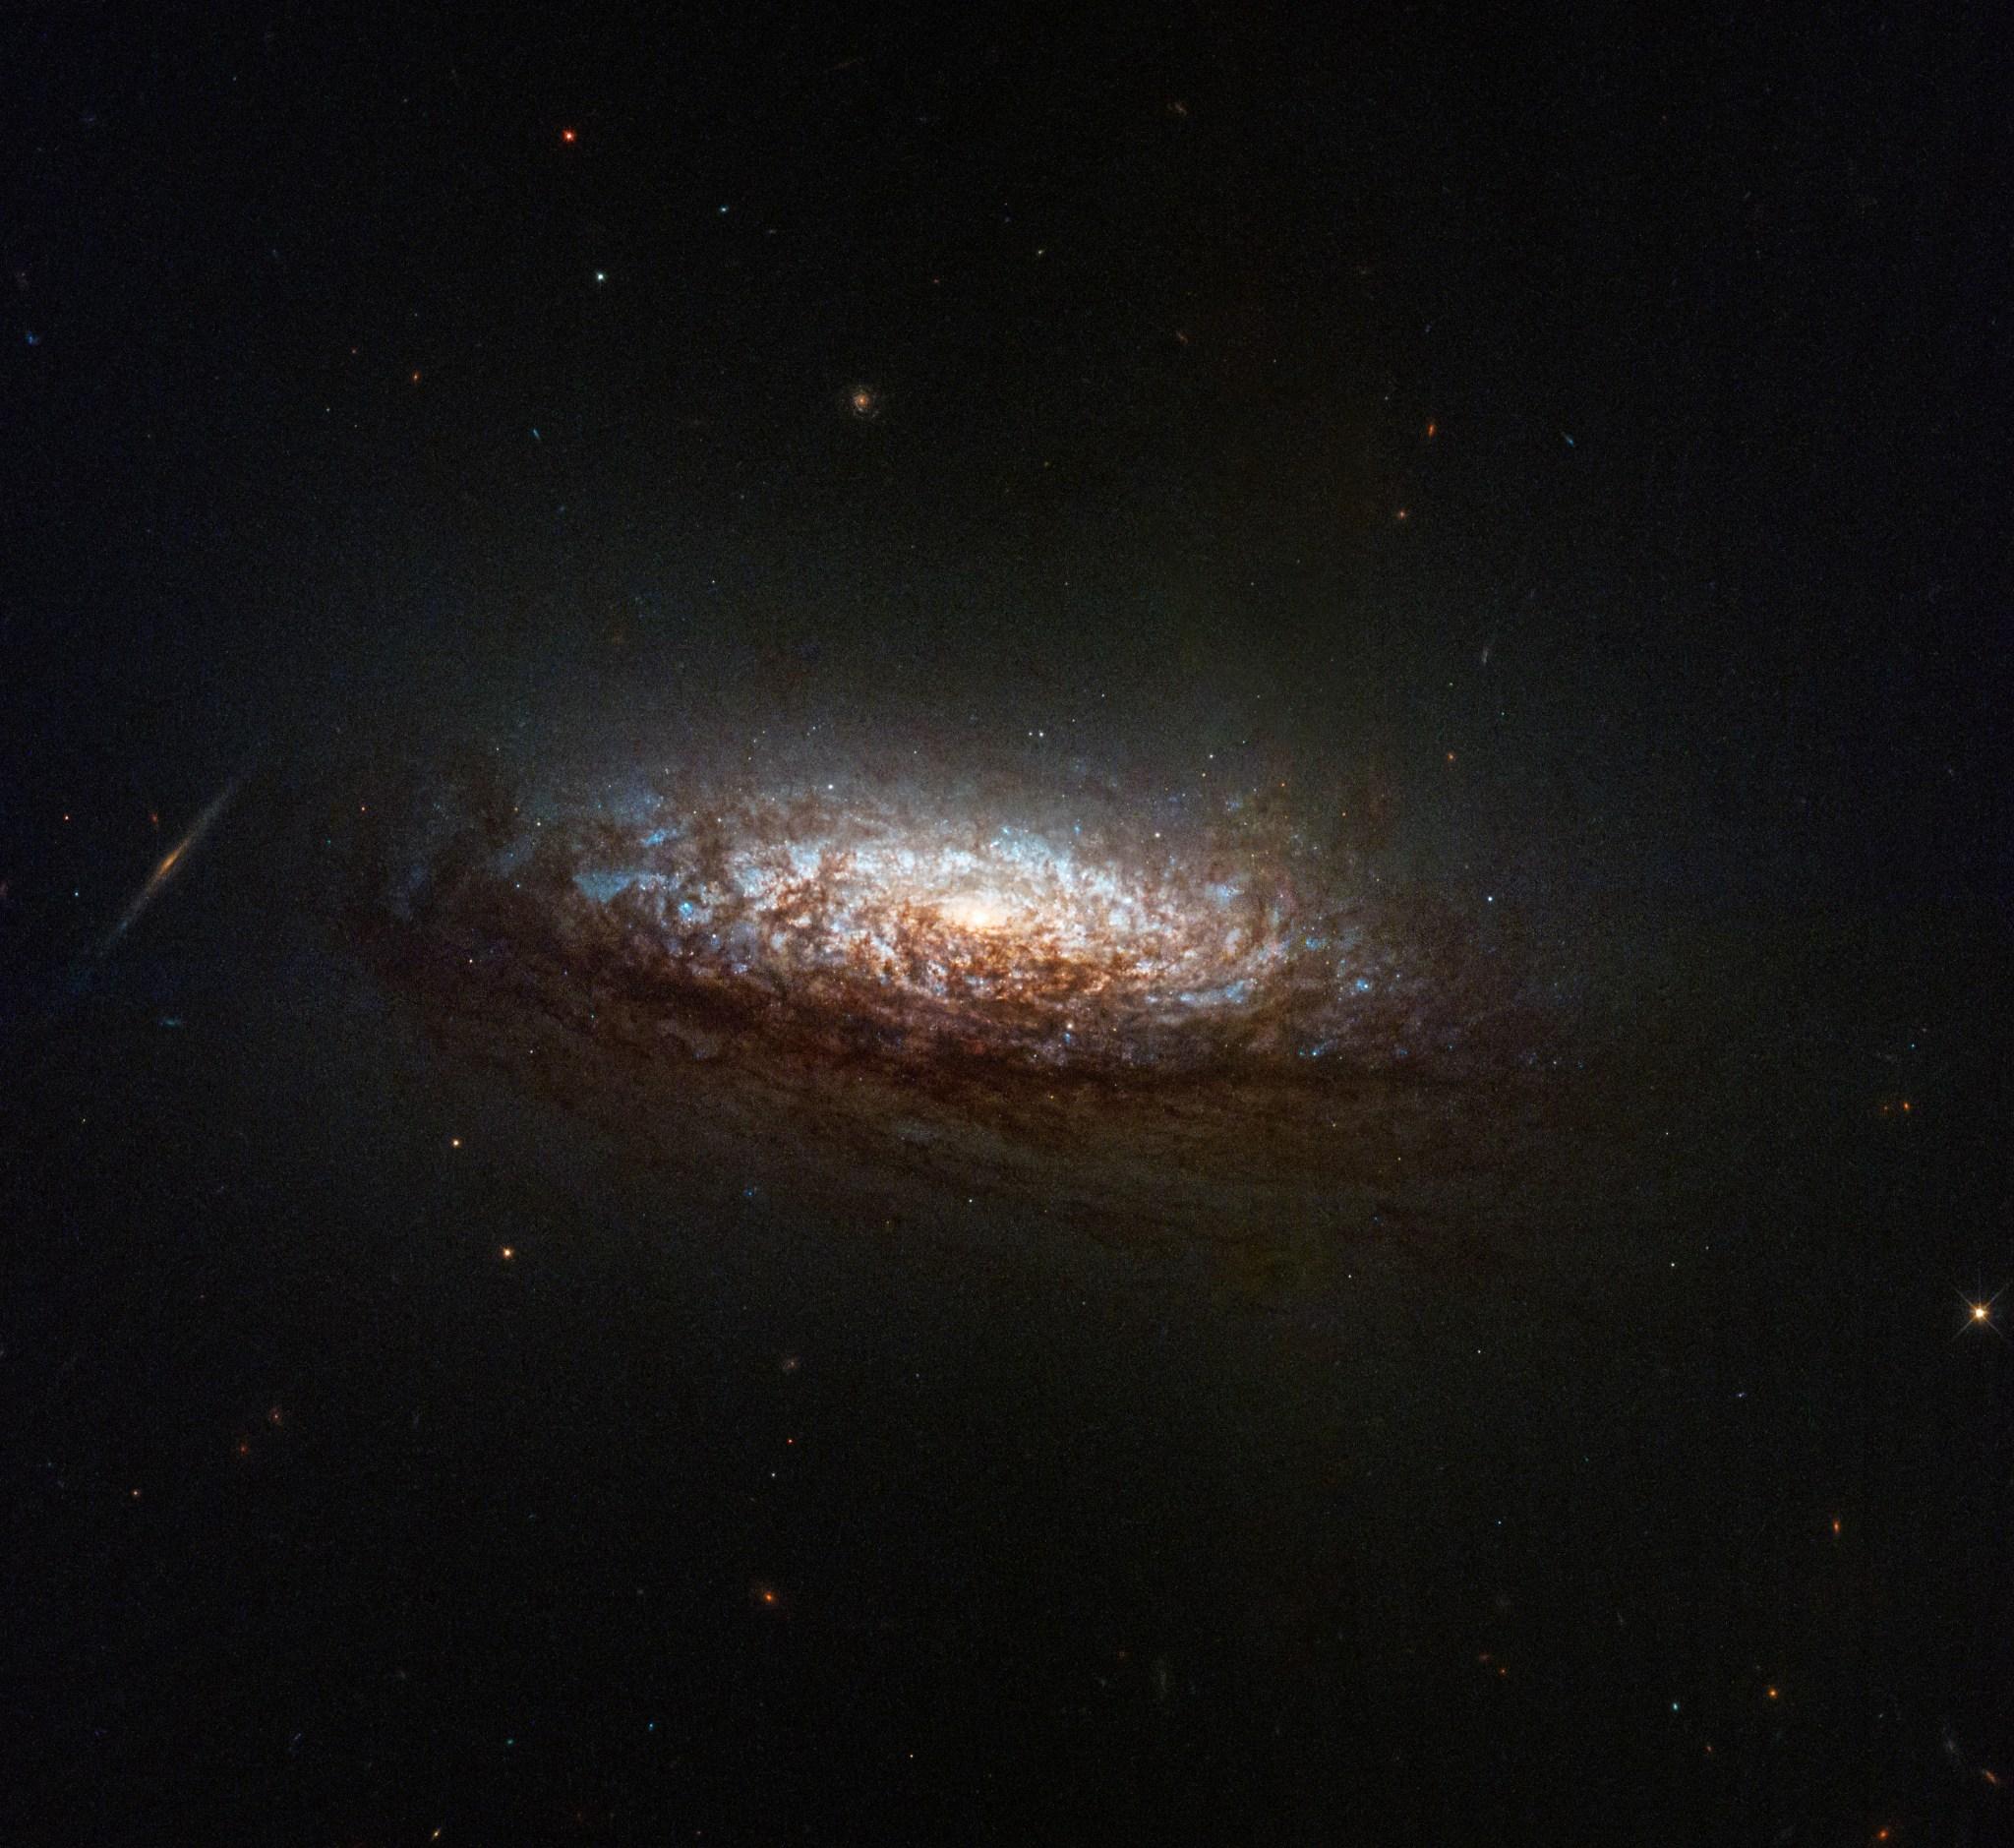 Image from Hubble Space Telescope